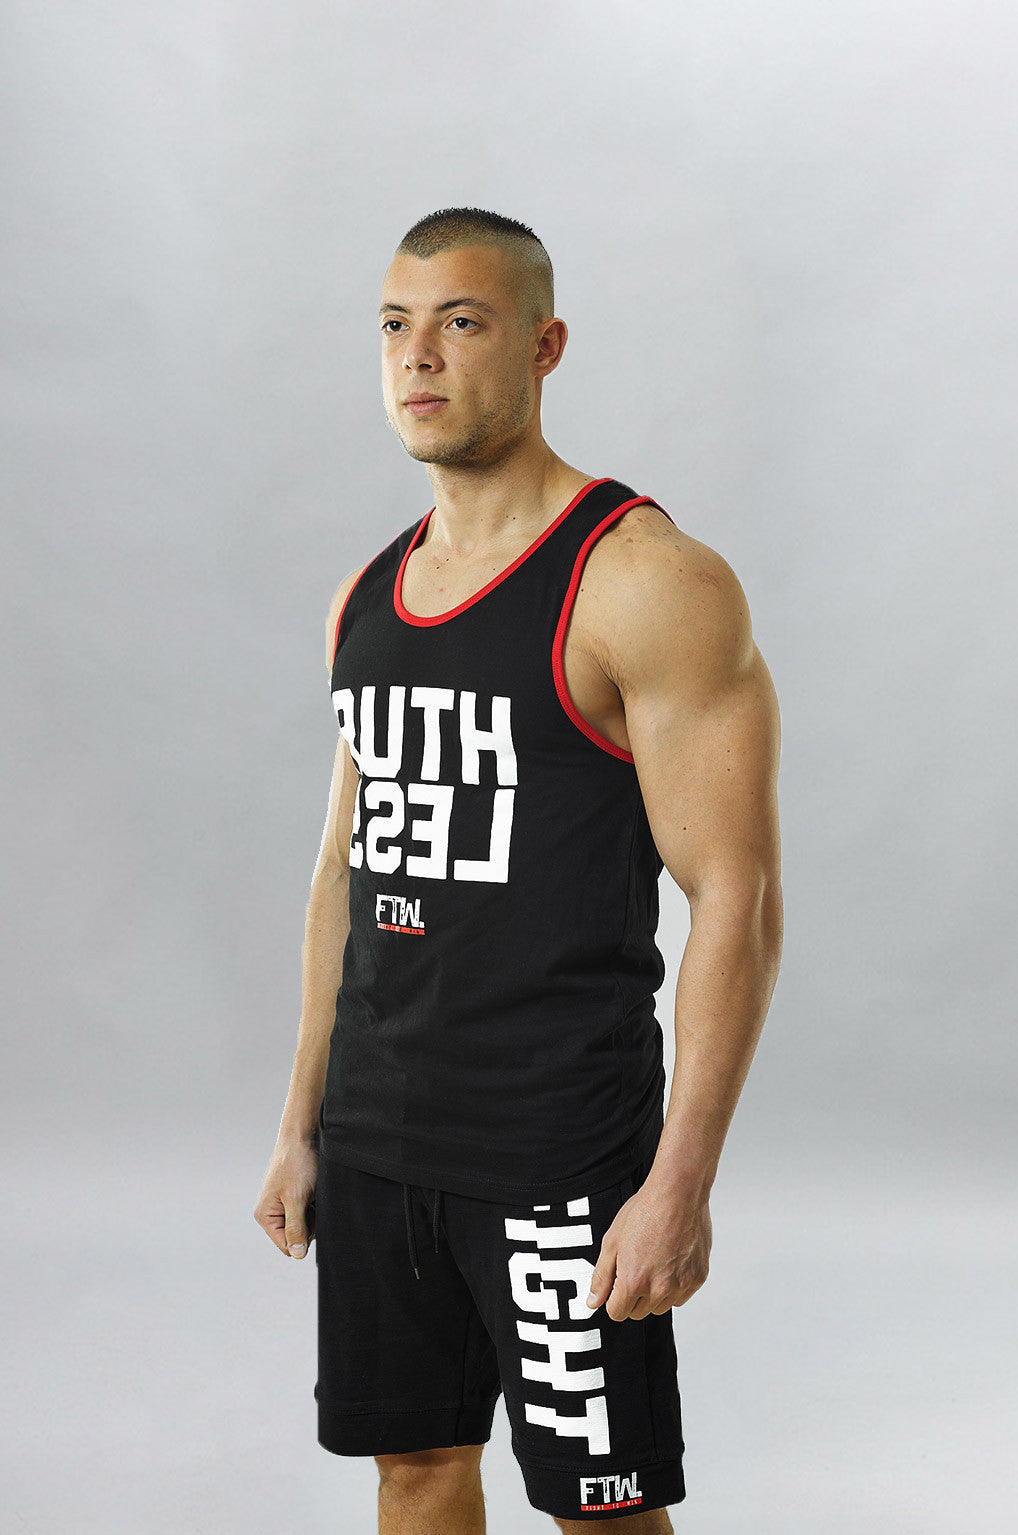 Ruthless - FTW -  - Gym Apparel Egypt